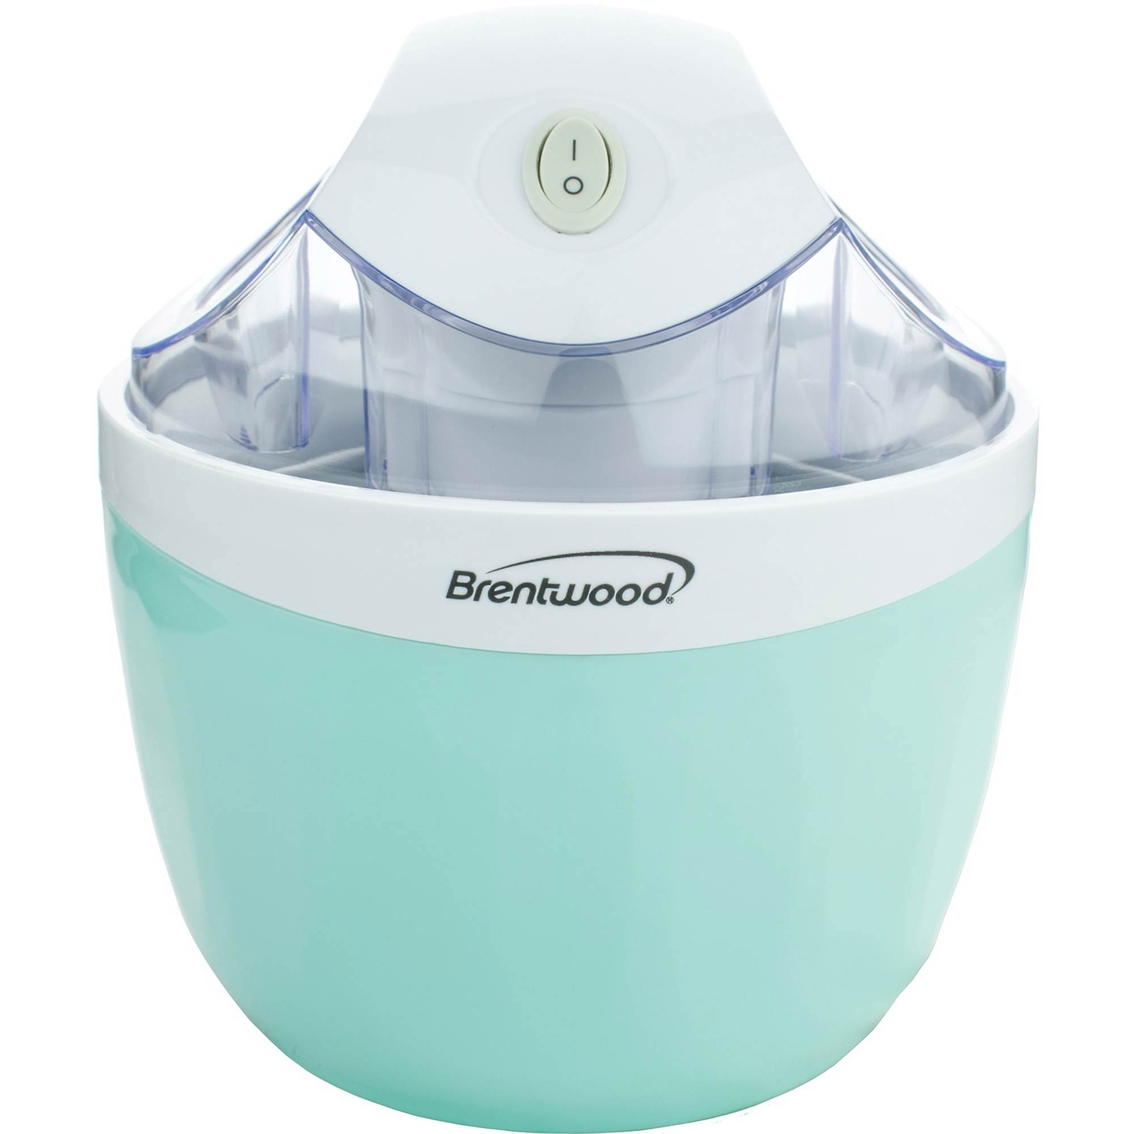 Brentwood 1 qt. Ice Cream and Sorbet Maker - Image 2 of 7